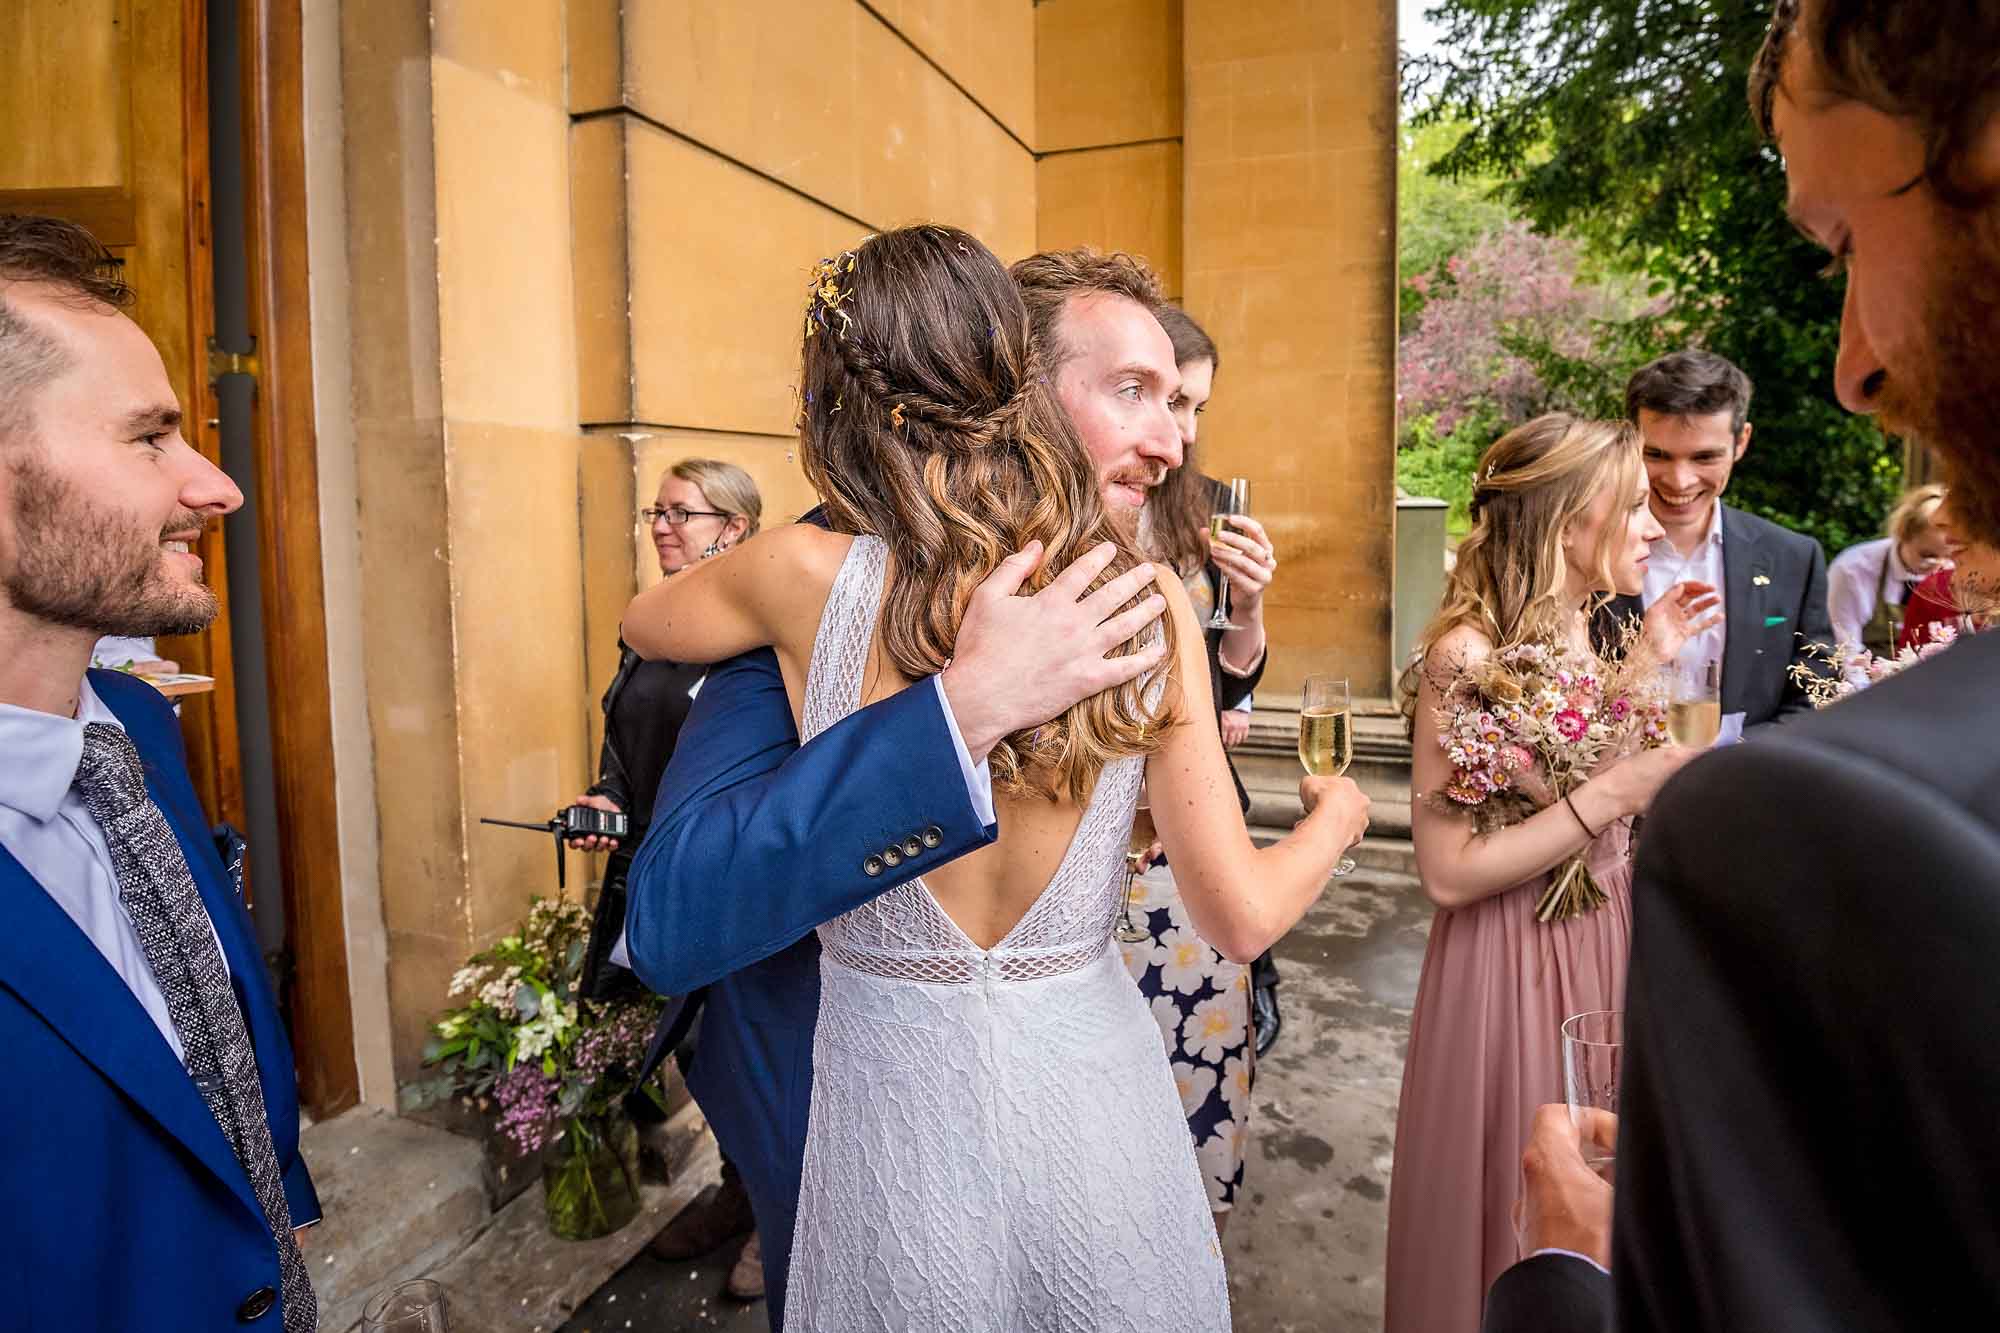 Male guest hugs bride as other mill around at wedding in Bristol